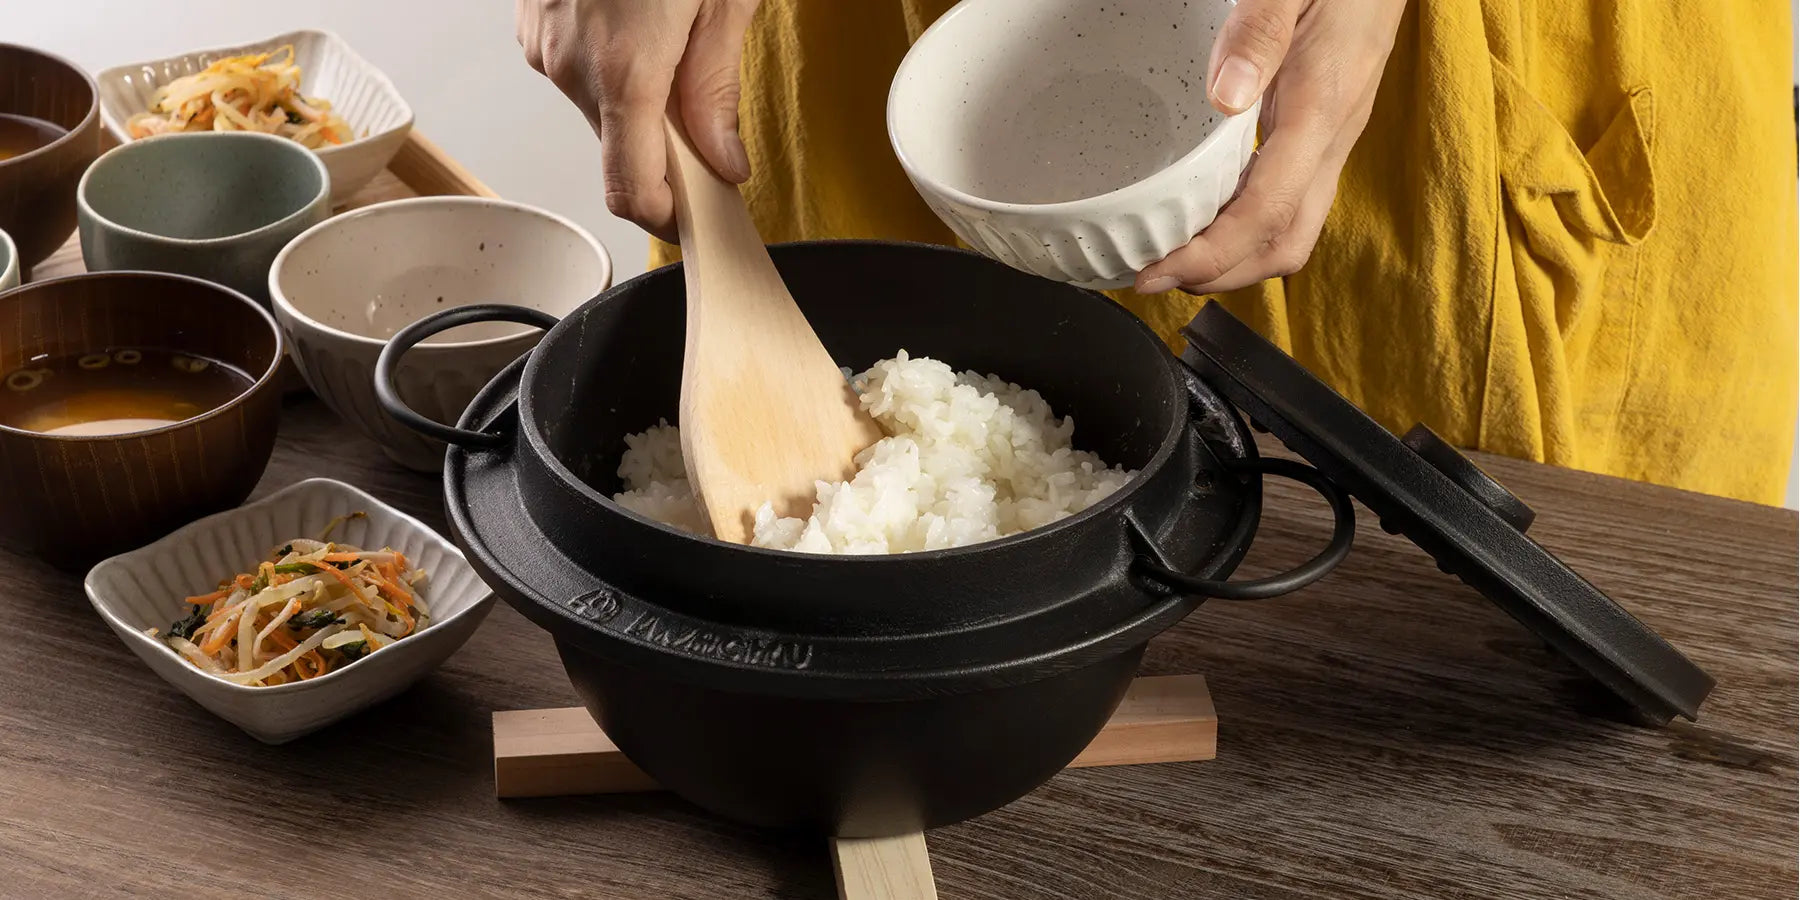 Discover products by IWACHU on Globalkitchen Japan.